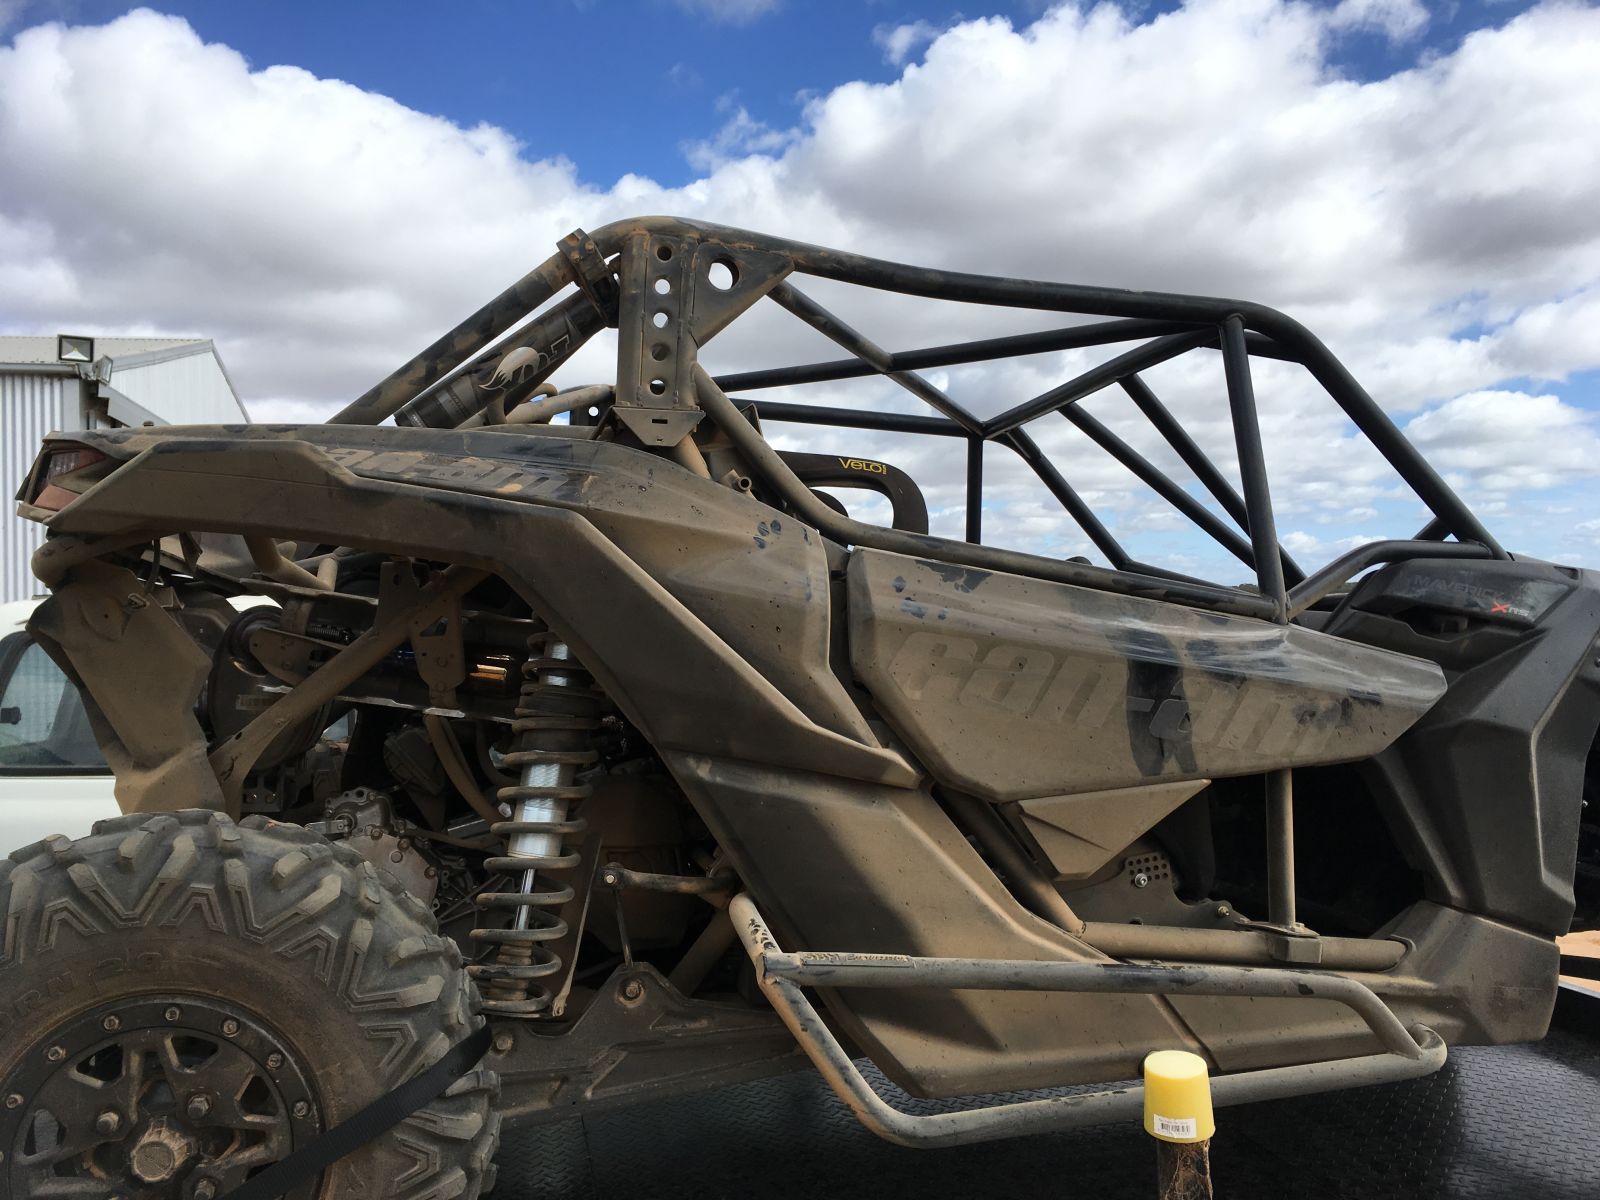 Dinged in roll cage.